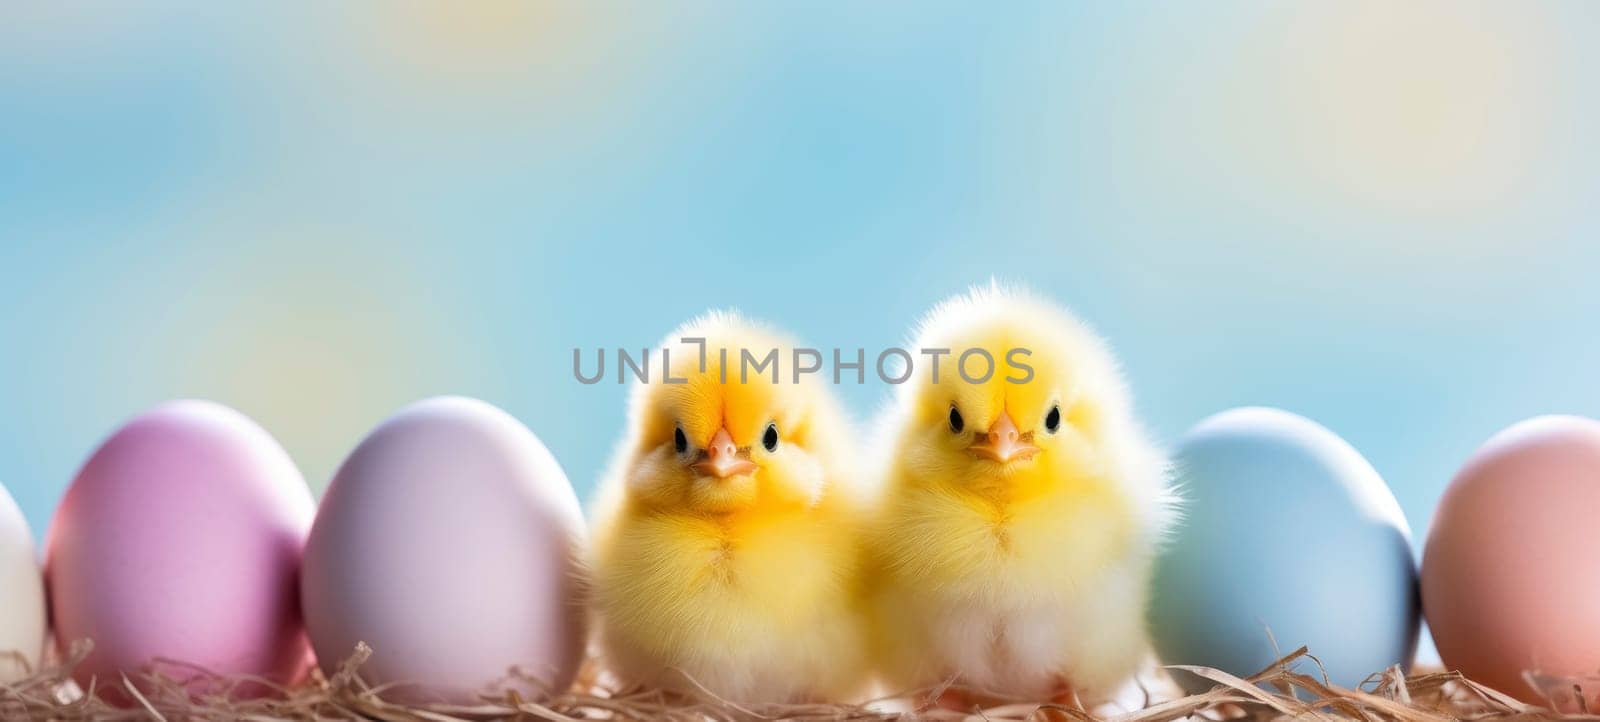 Adorable Chicks with Pastel Easter Eggs by andreyz